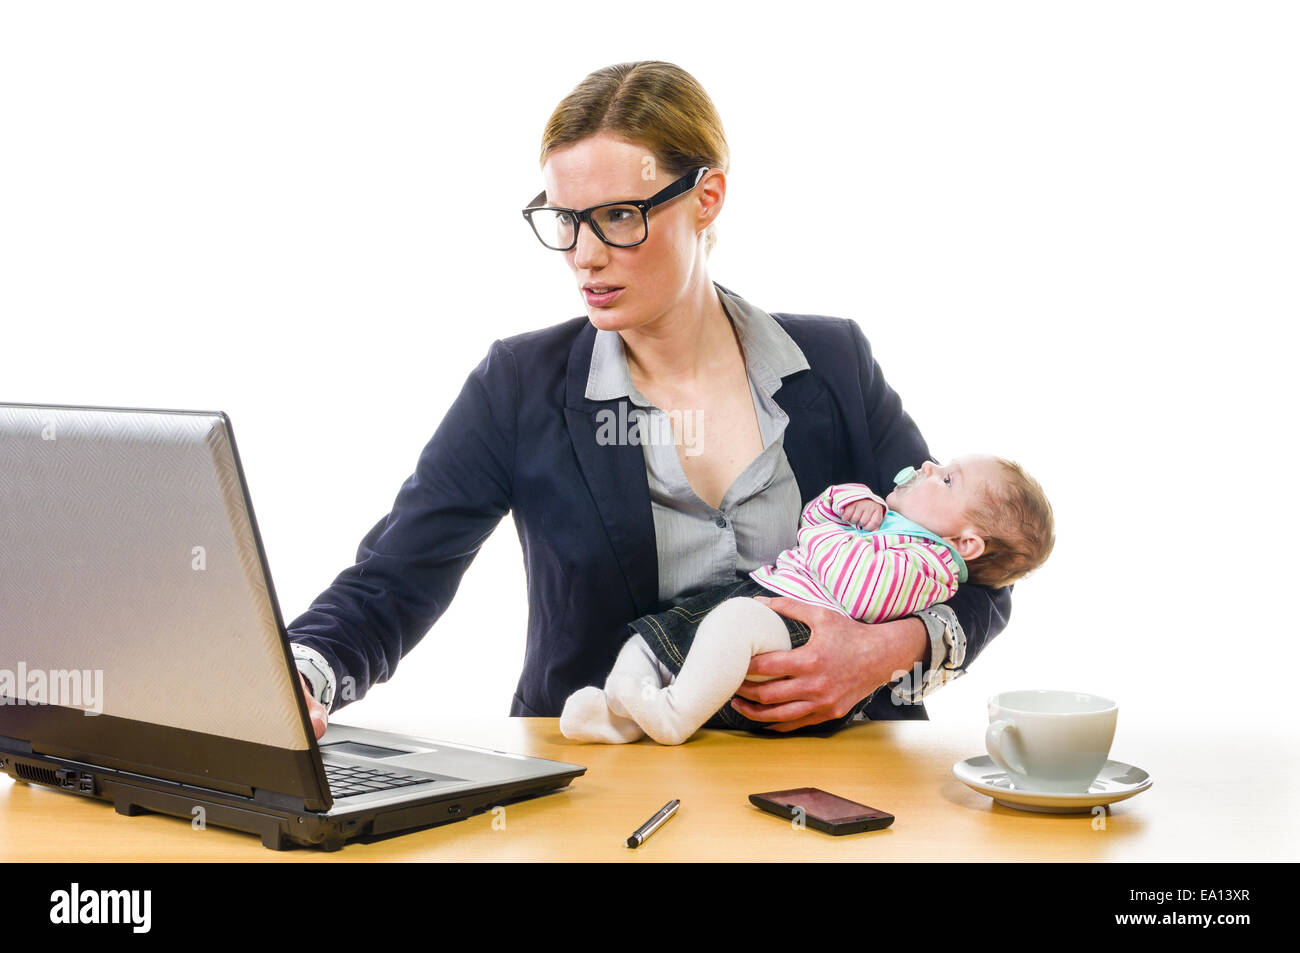 Businesswoman with baby and PC Stock Photo